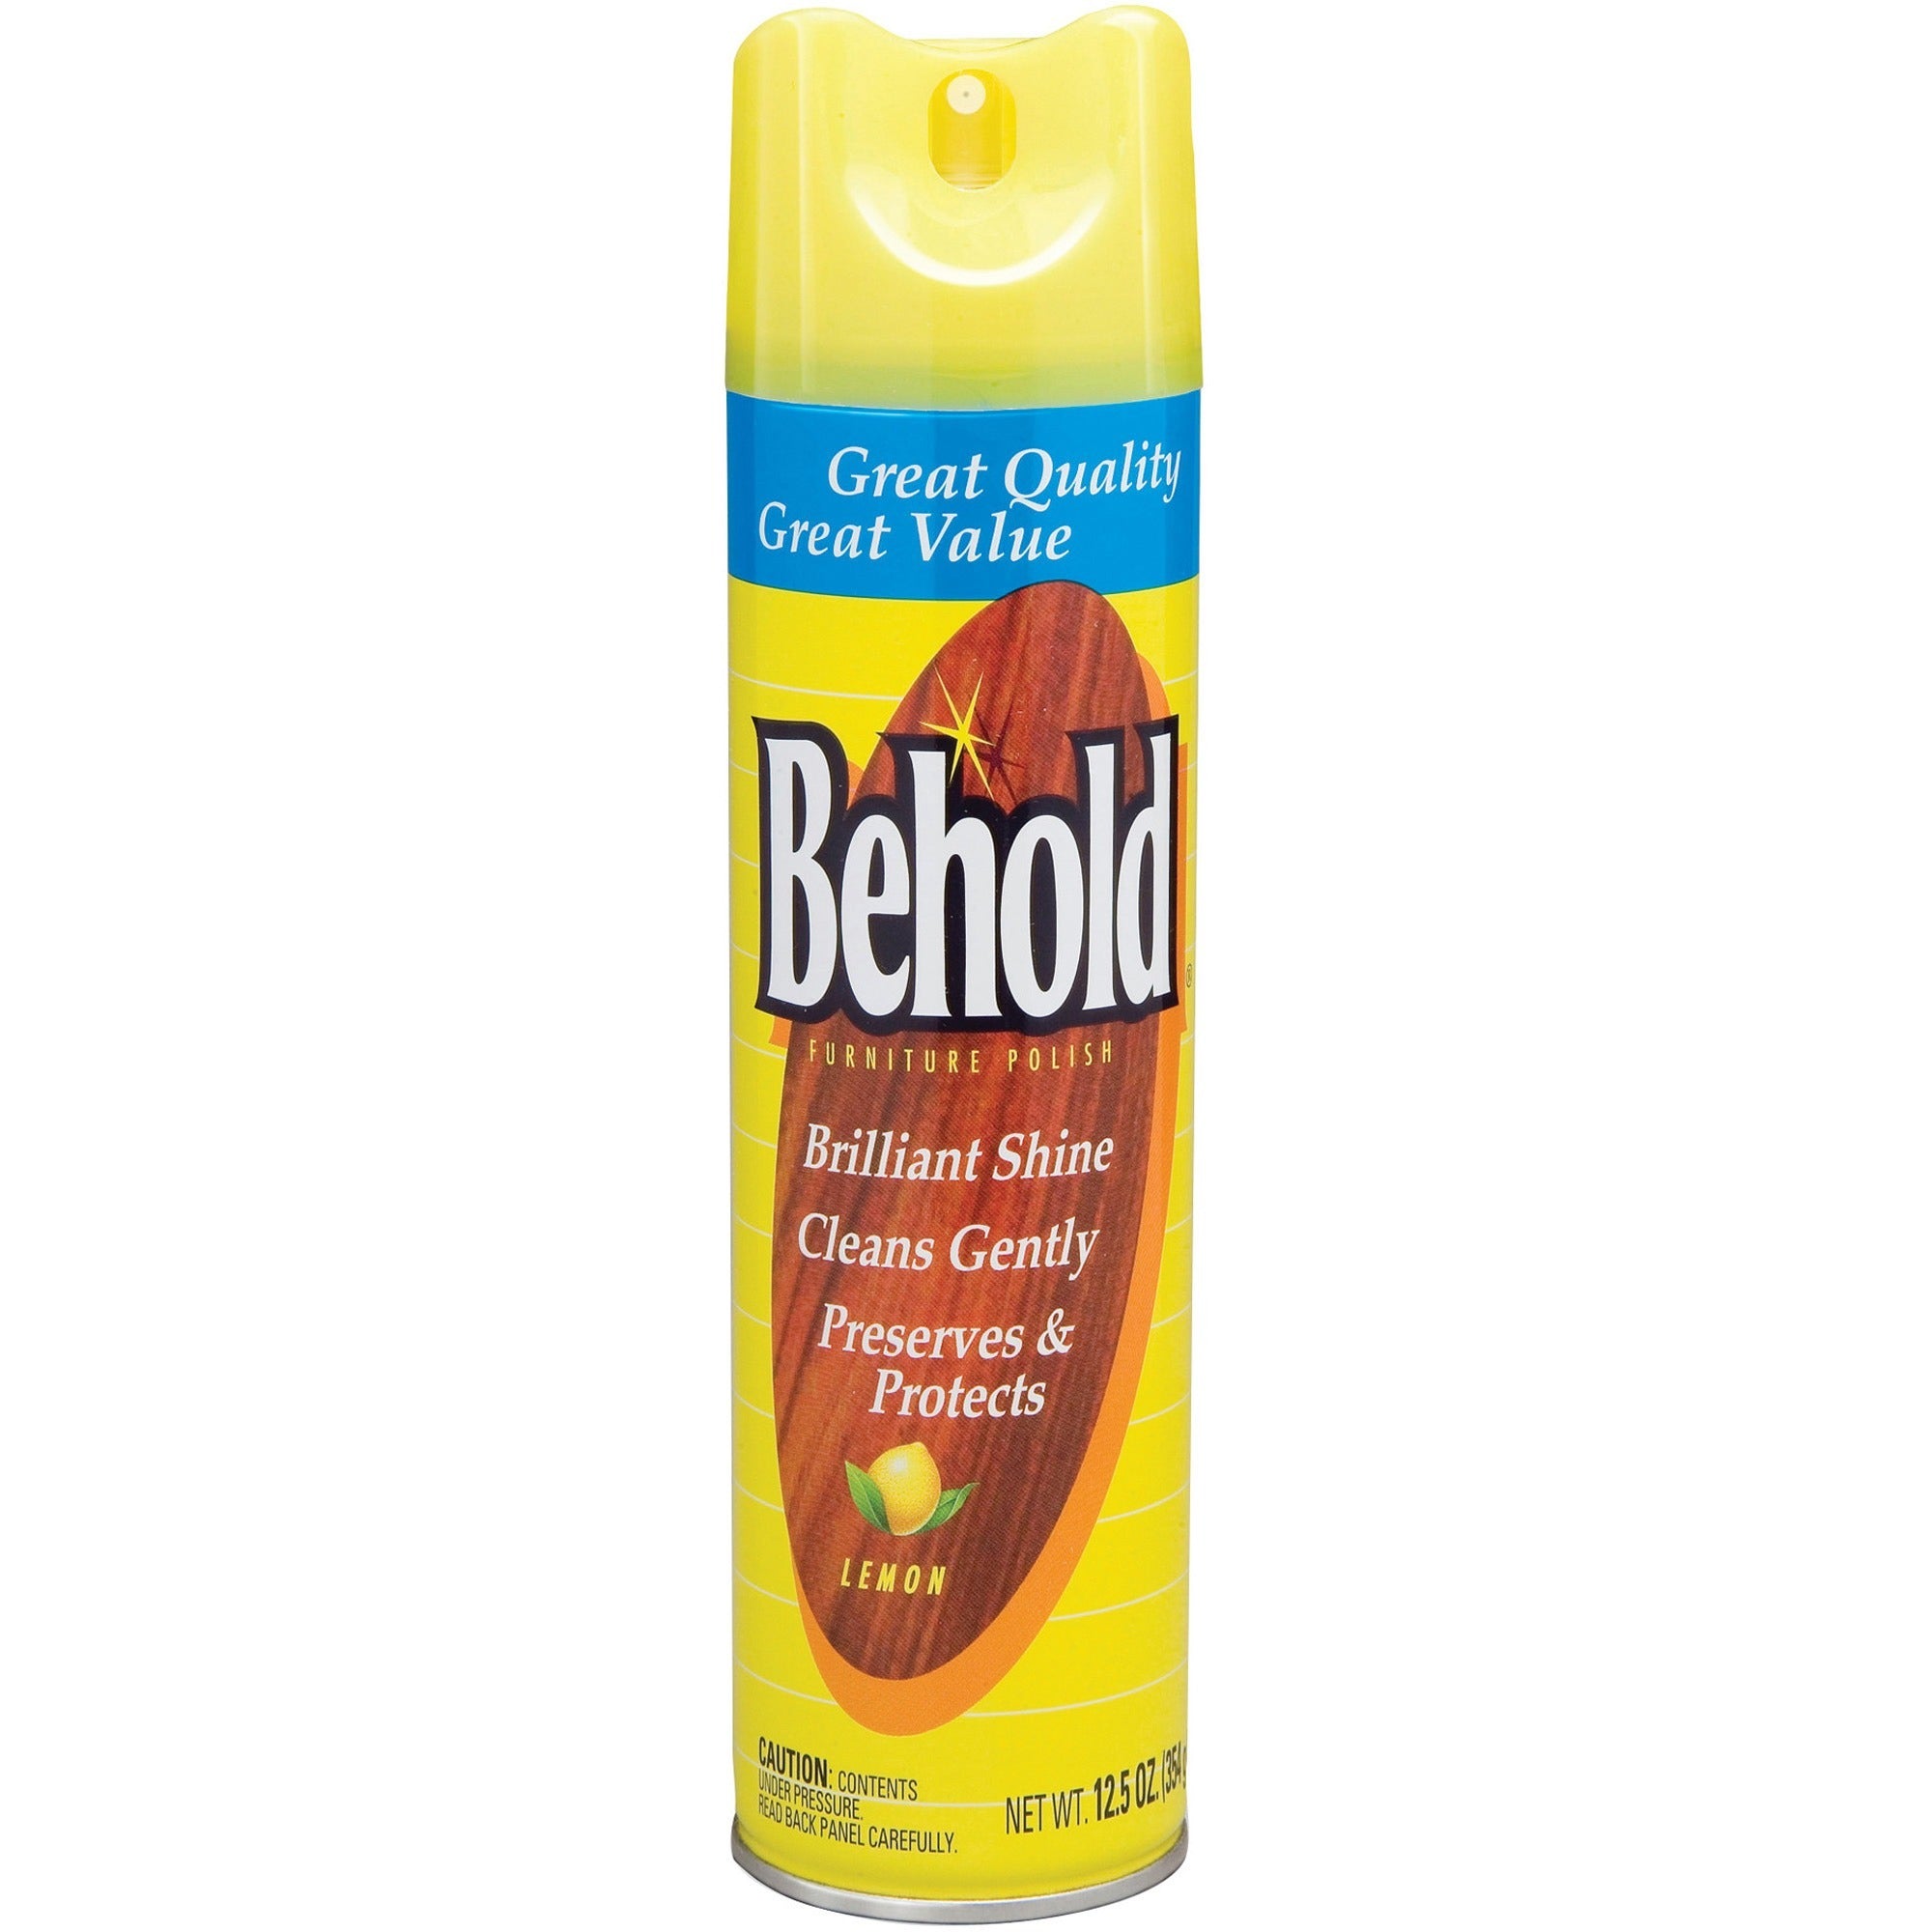 diversey-behold-lemon-furniture-polish-ready-to-use-1250-oz-078-lb-lemon-scent-6-carton-spill-resistant-wear-resistant-stain-resistant-long-lasting-non-greasy-moisturizing-absorbs-quickly-clear_dvocb520009ct - 1